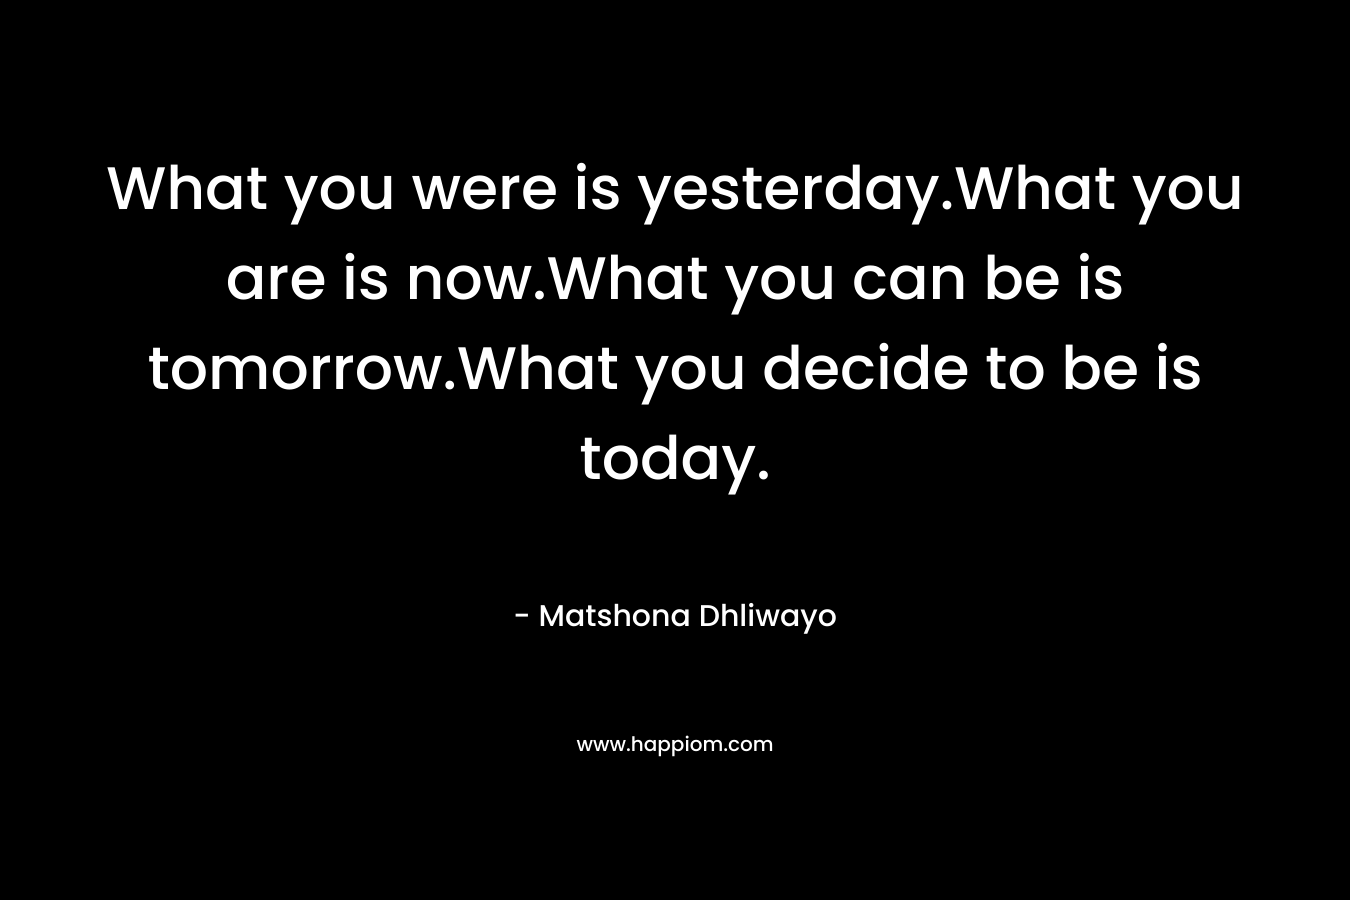 What you were is yesterday.What you are is now.What you can be is tomorrow.What you decide to be is today.